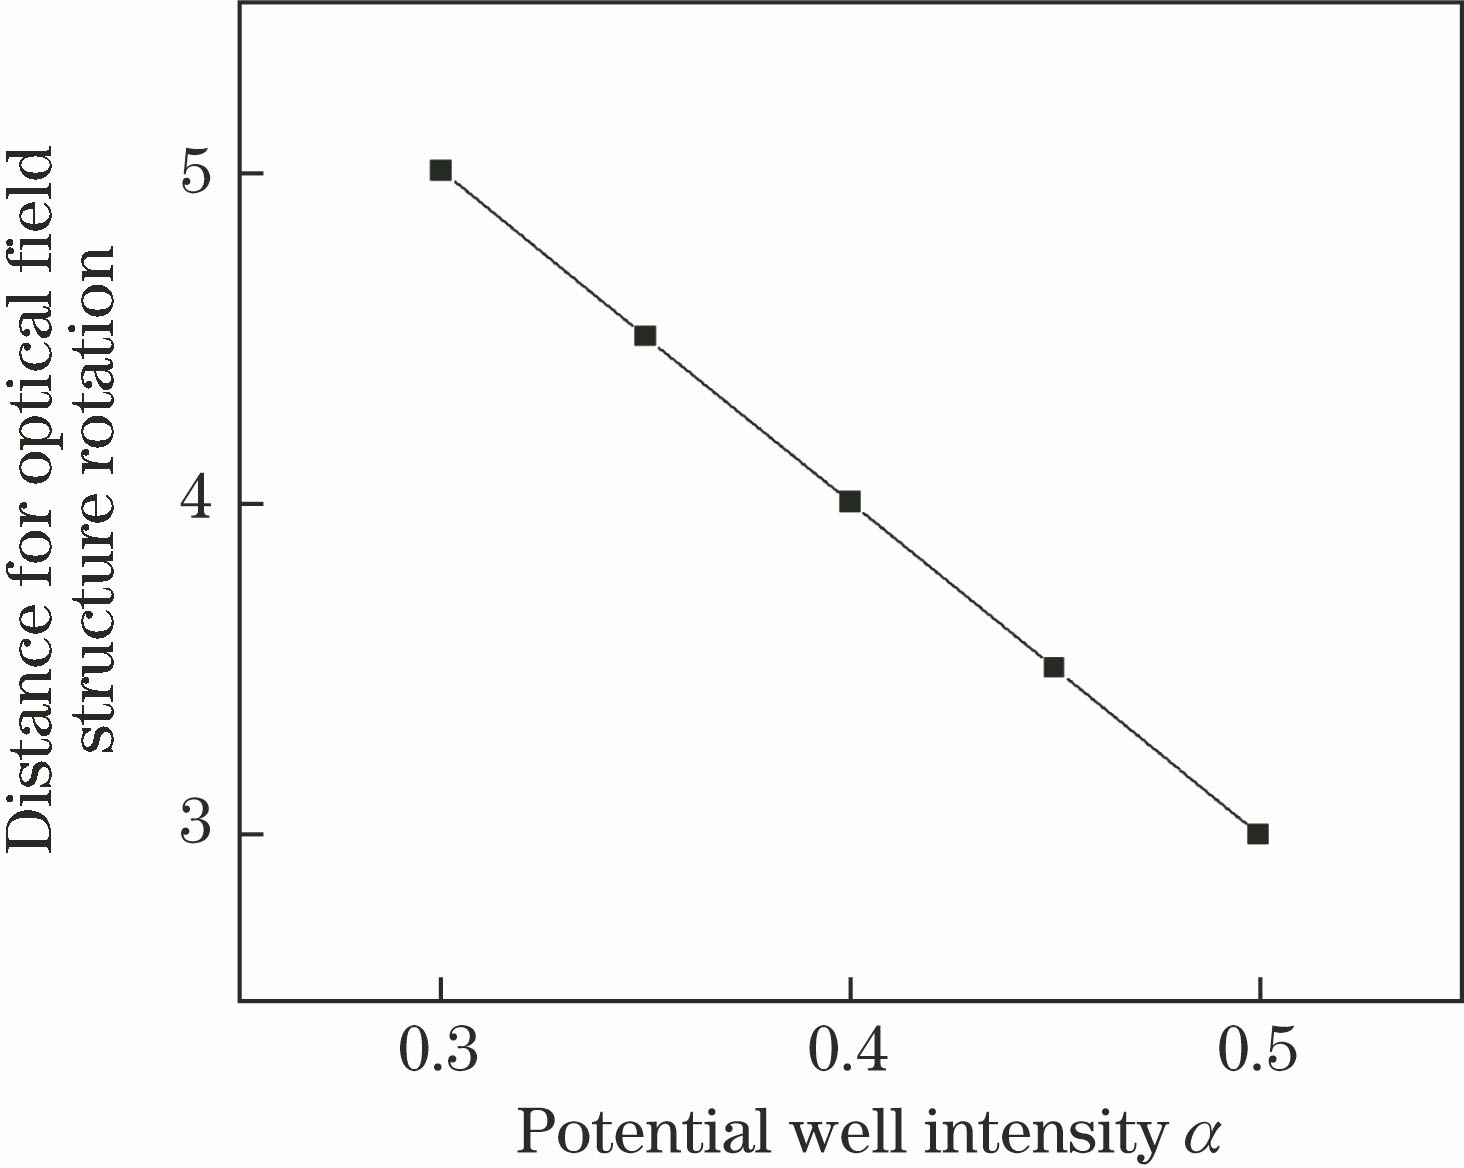 Propagation distance for optical structure rotation versus intensity of potential well